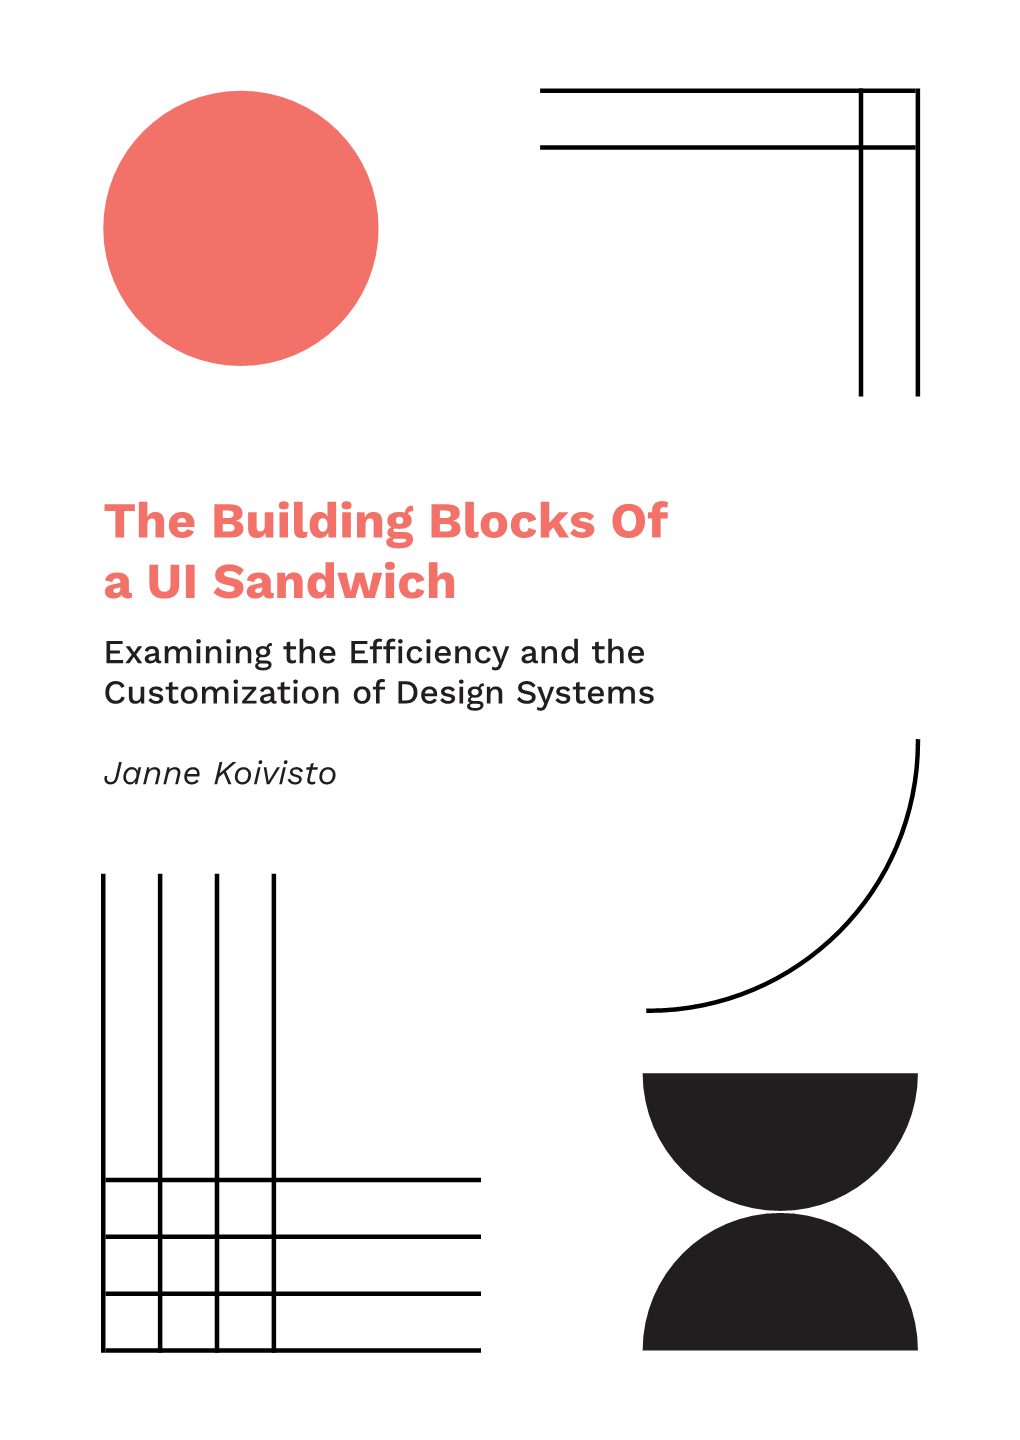 The Building Blocks of a UI Sandwich Examining the Efciency and the Customization of Design Systems